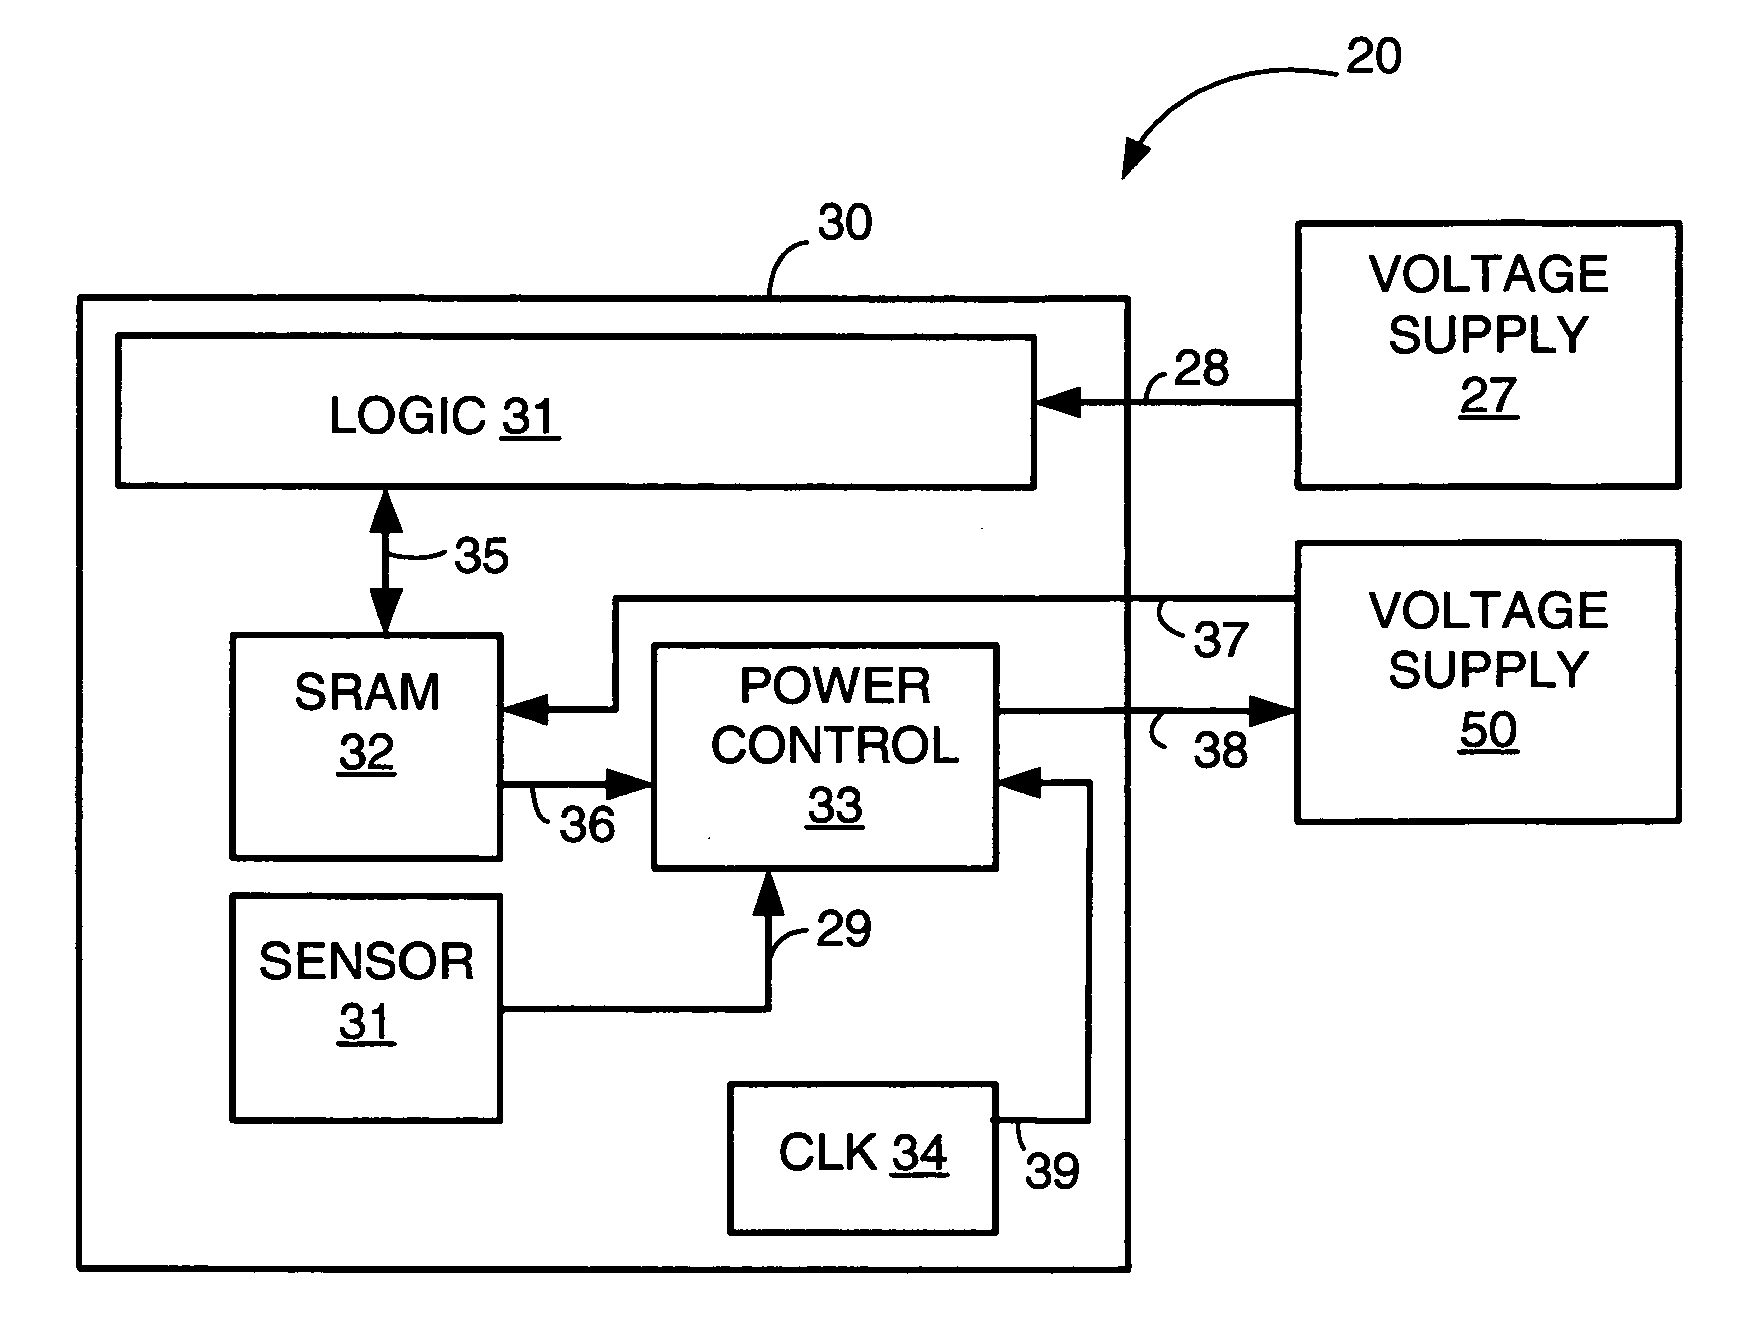 Method and apparatus for reducing soft error rate in SRAM arrays using elevated SRAM voltage during periods of low activity